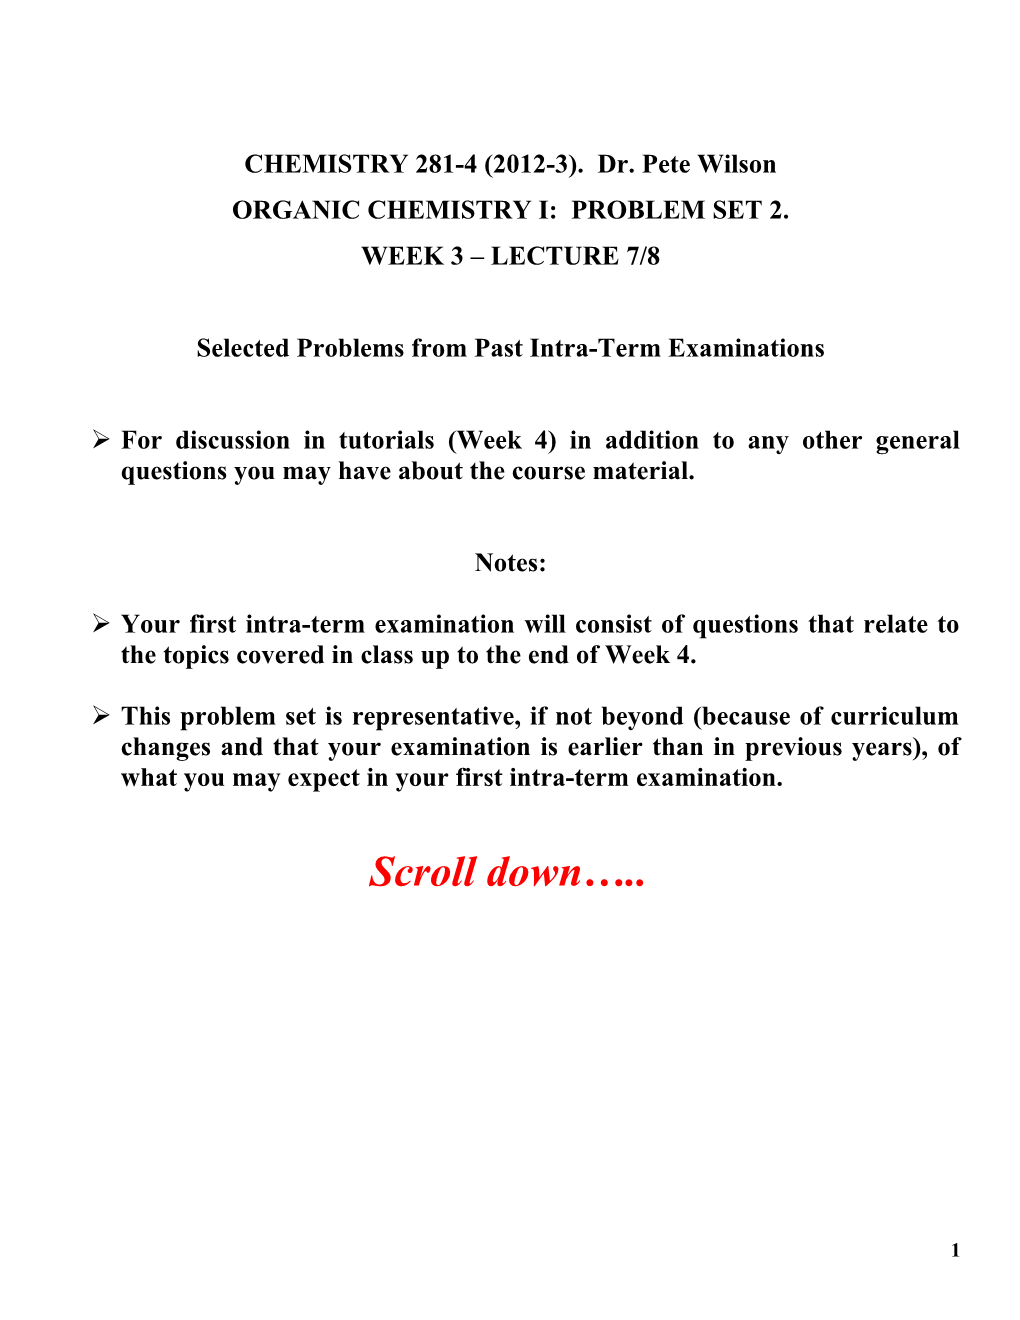 Selected Problems from Past Intra-Term Examinations